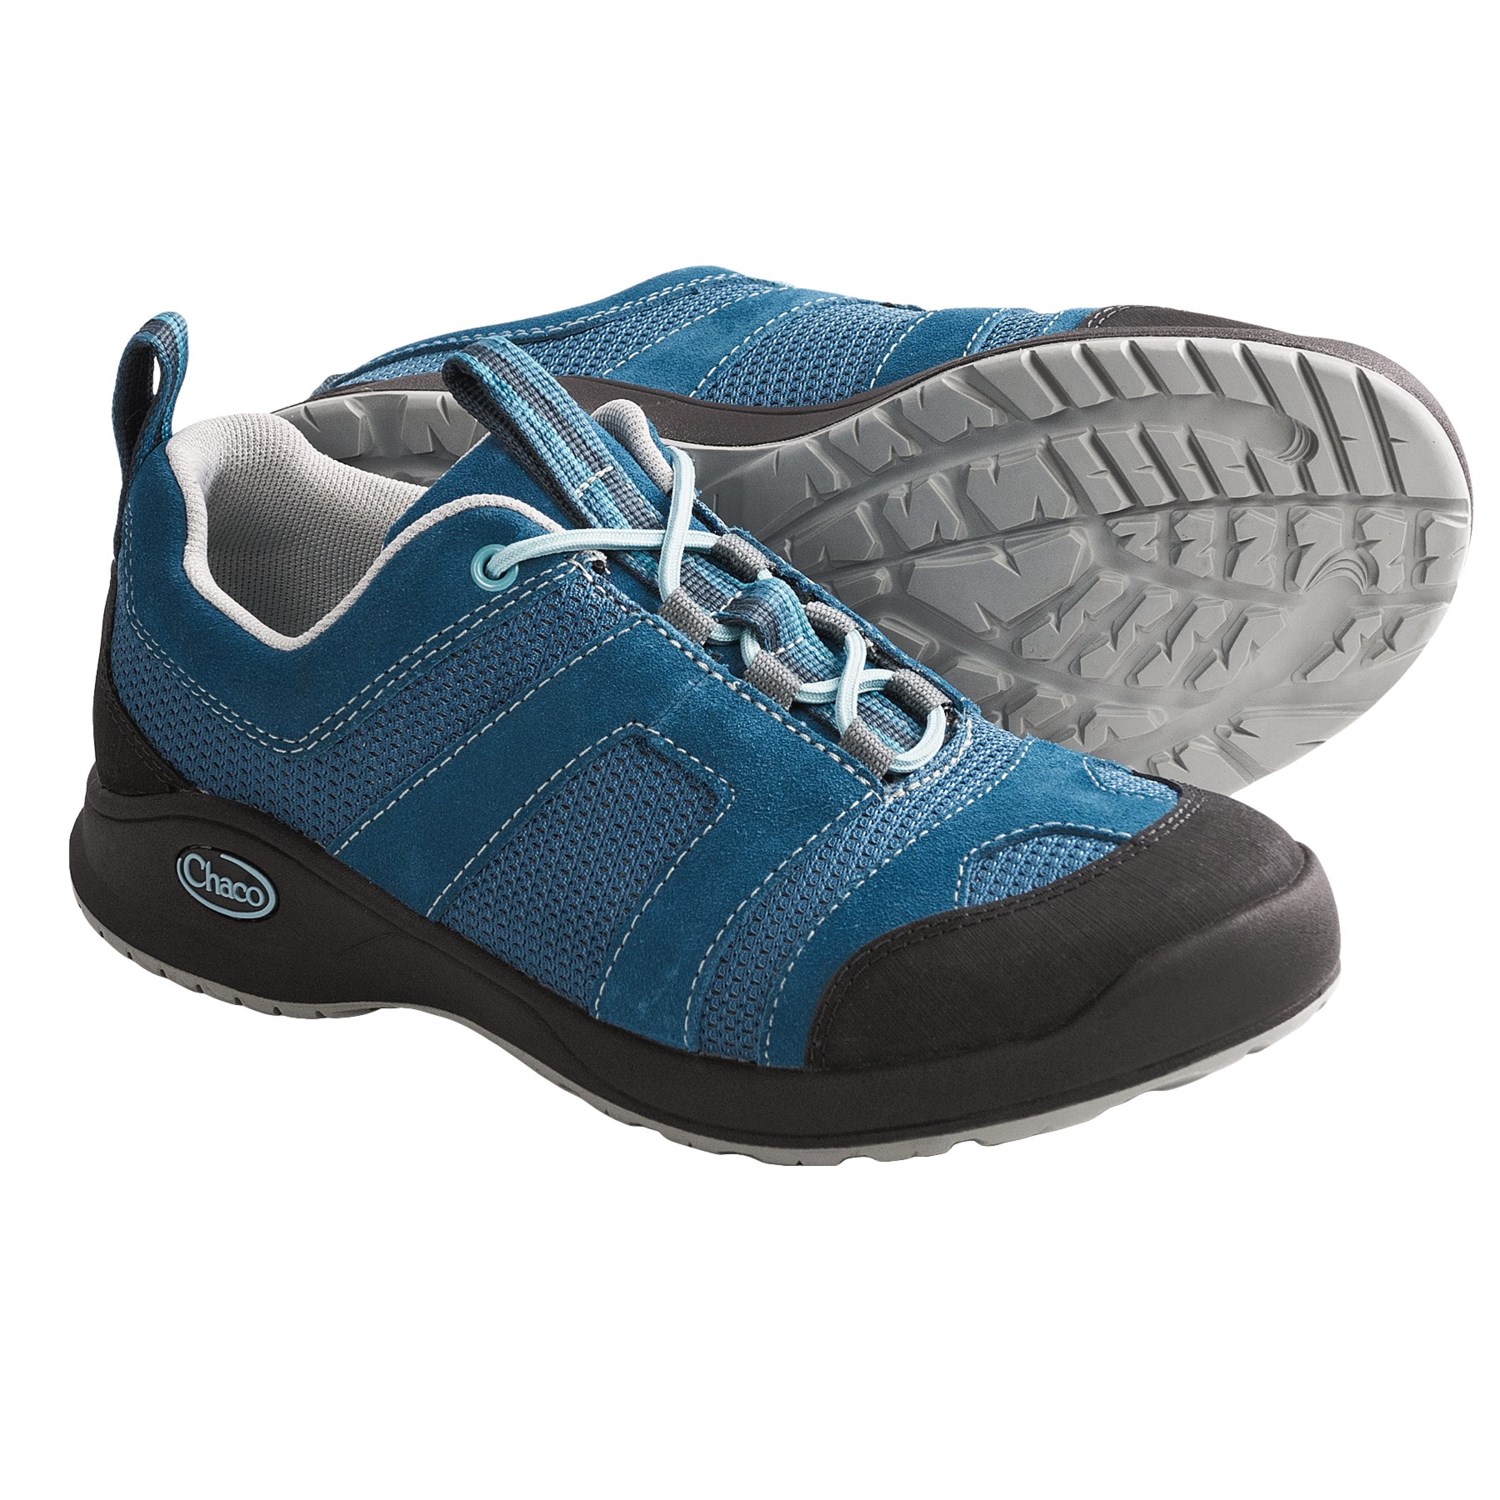 Chaco Vade Bulloo Shoes (For Women) in Zenith Blue